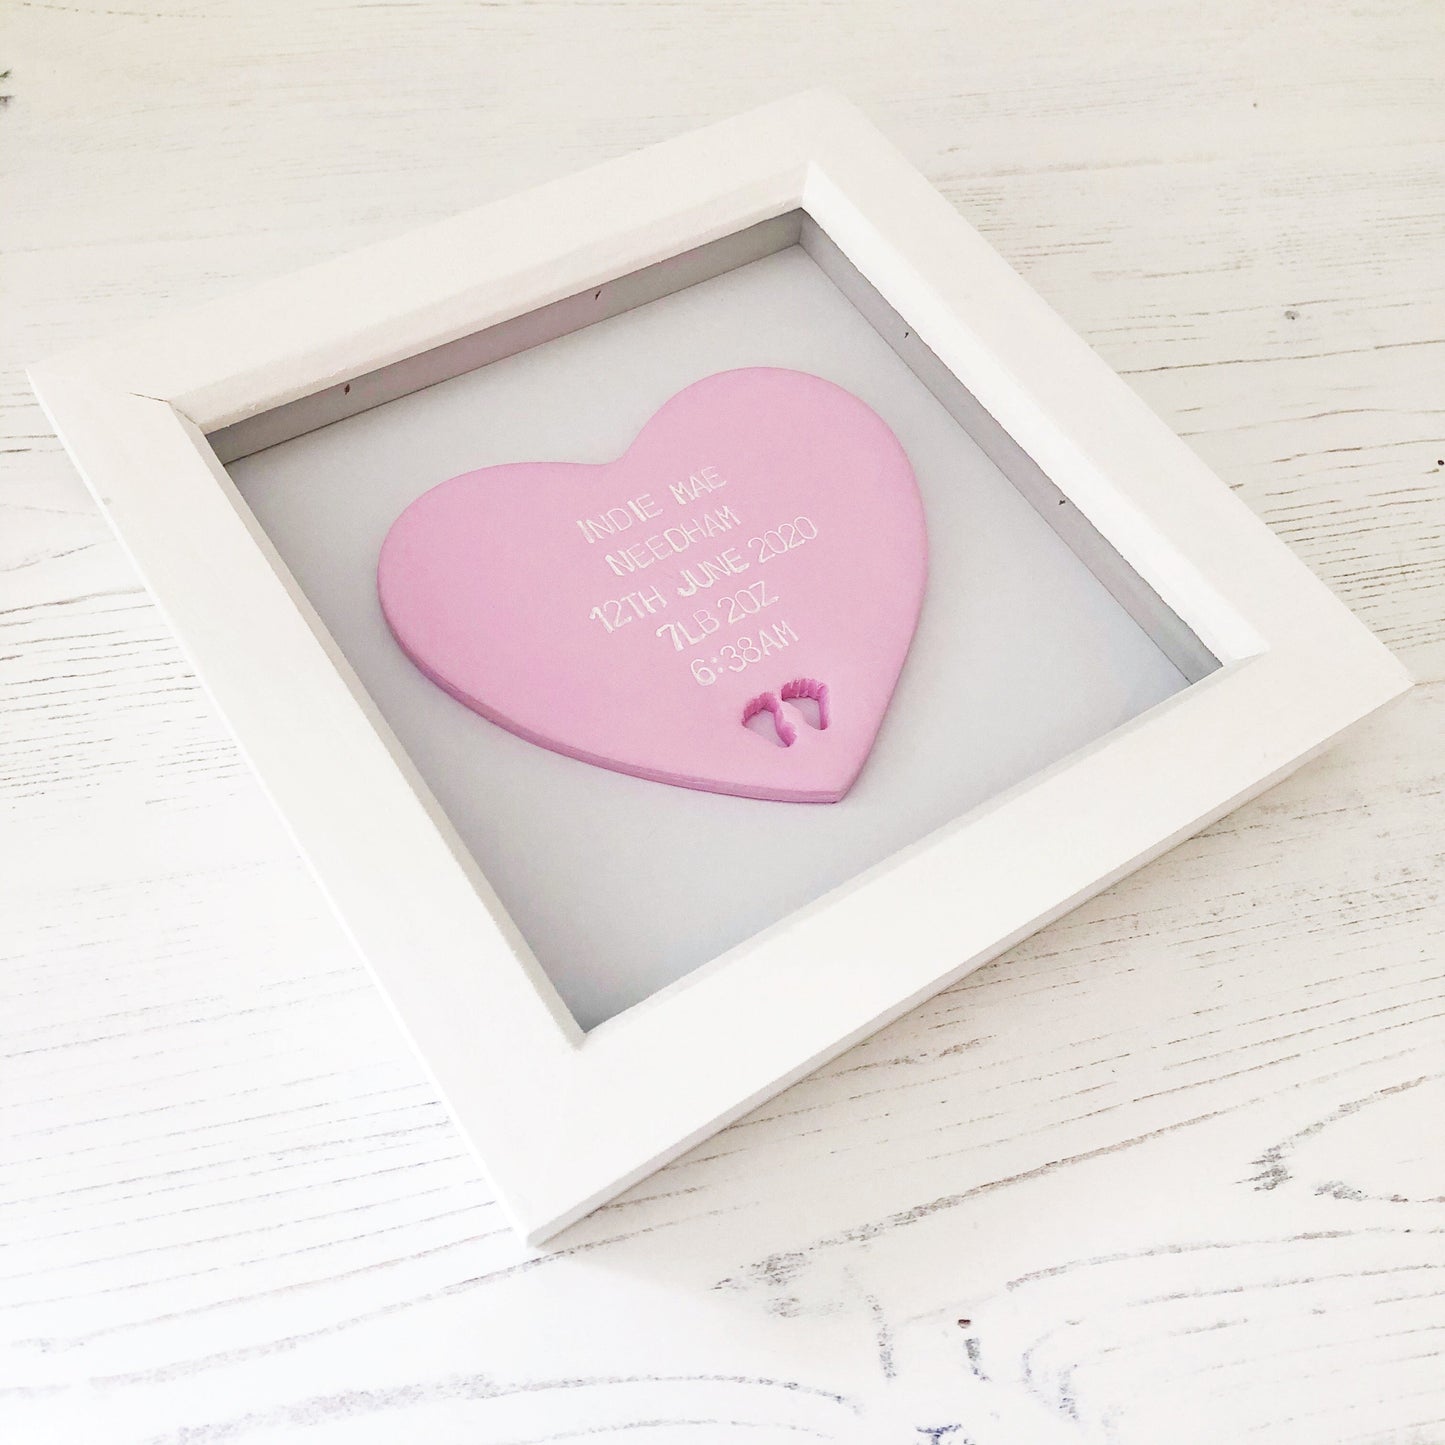 Personalised baby keepsake gift, pastel pink clay heart with baby feet cut out at the bottom of the heart in a white box frame, the heart is personalised with the baby’s name, date of birth, weight and time